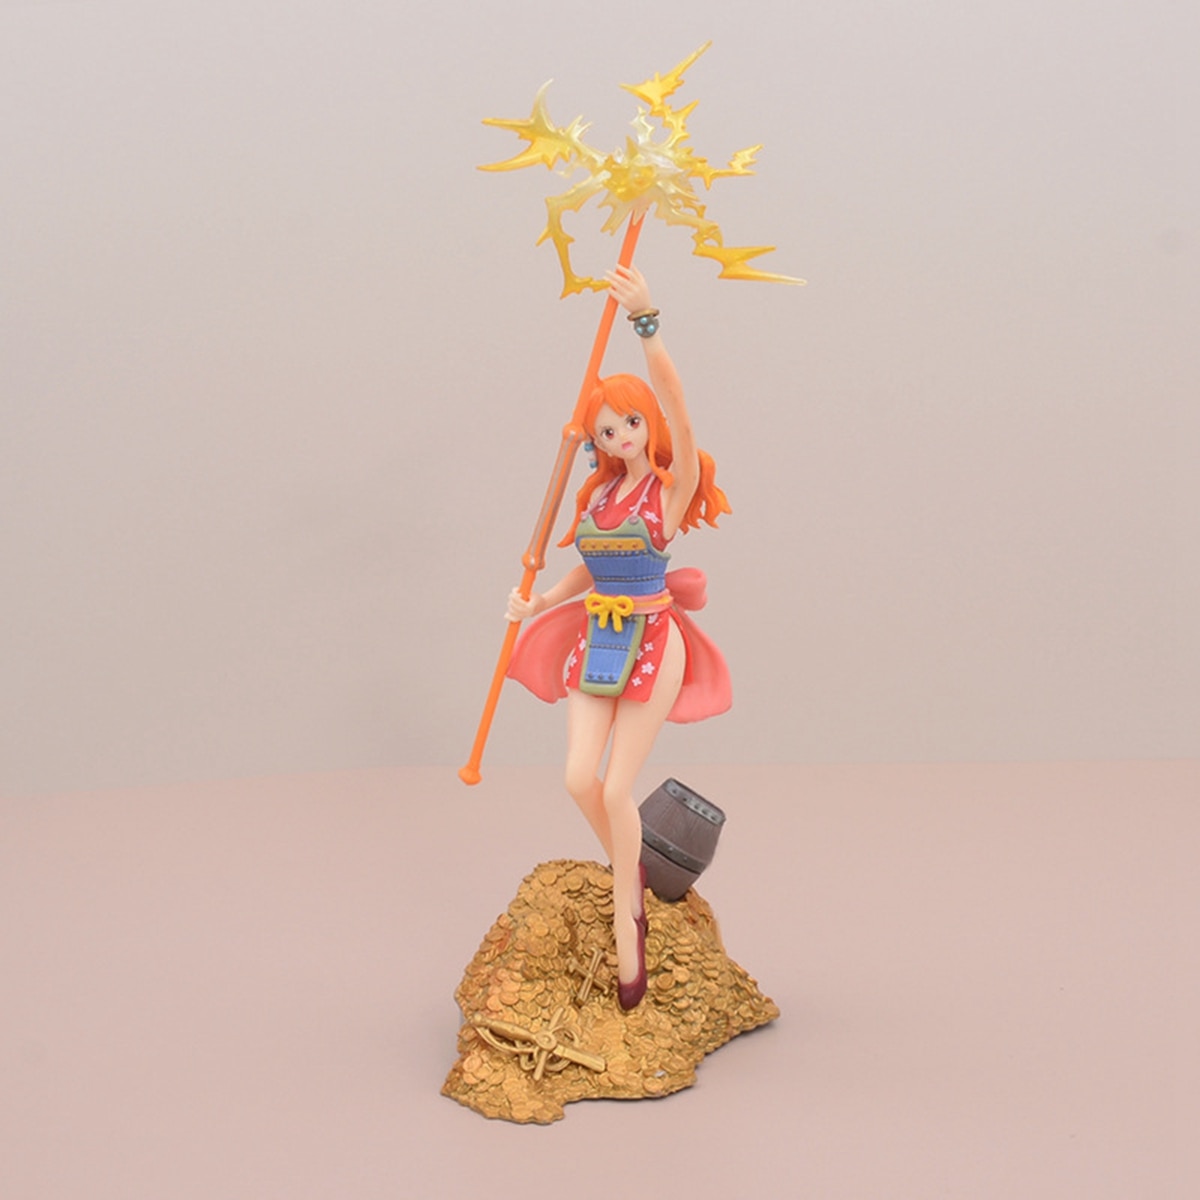 Anime One Piece Nami Figure Diva Stick Model Toy Gift Collection 23CM Luffy Action Figure Collection 2 - One Piece Store